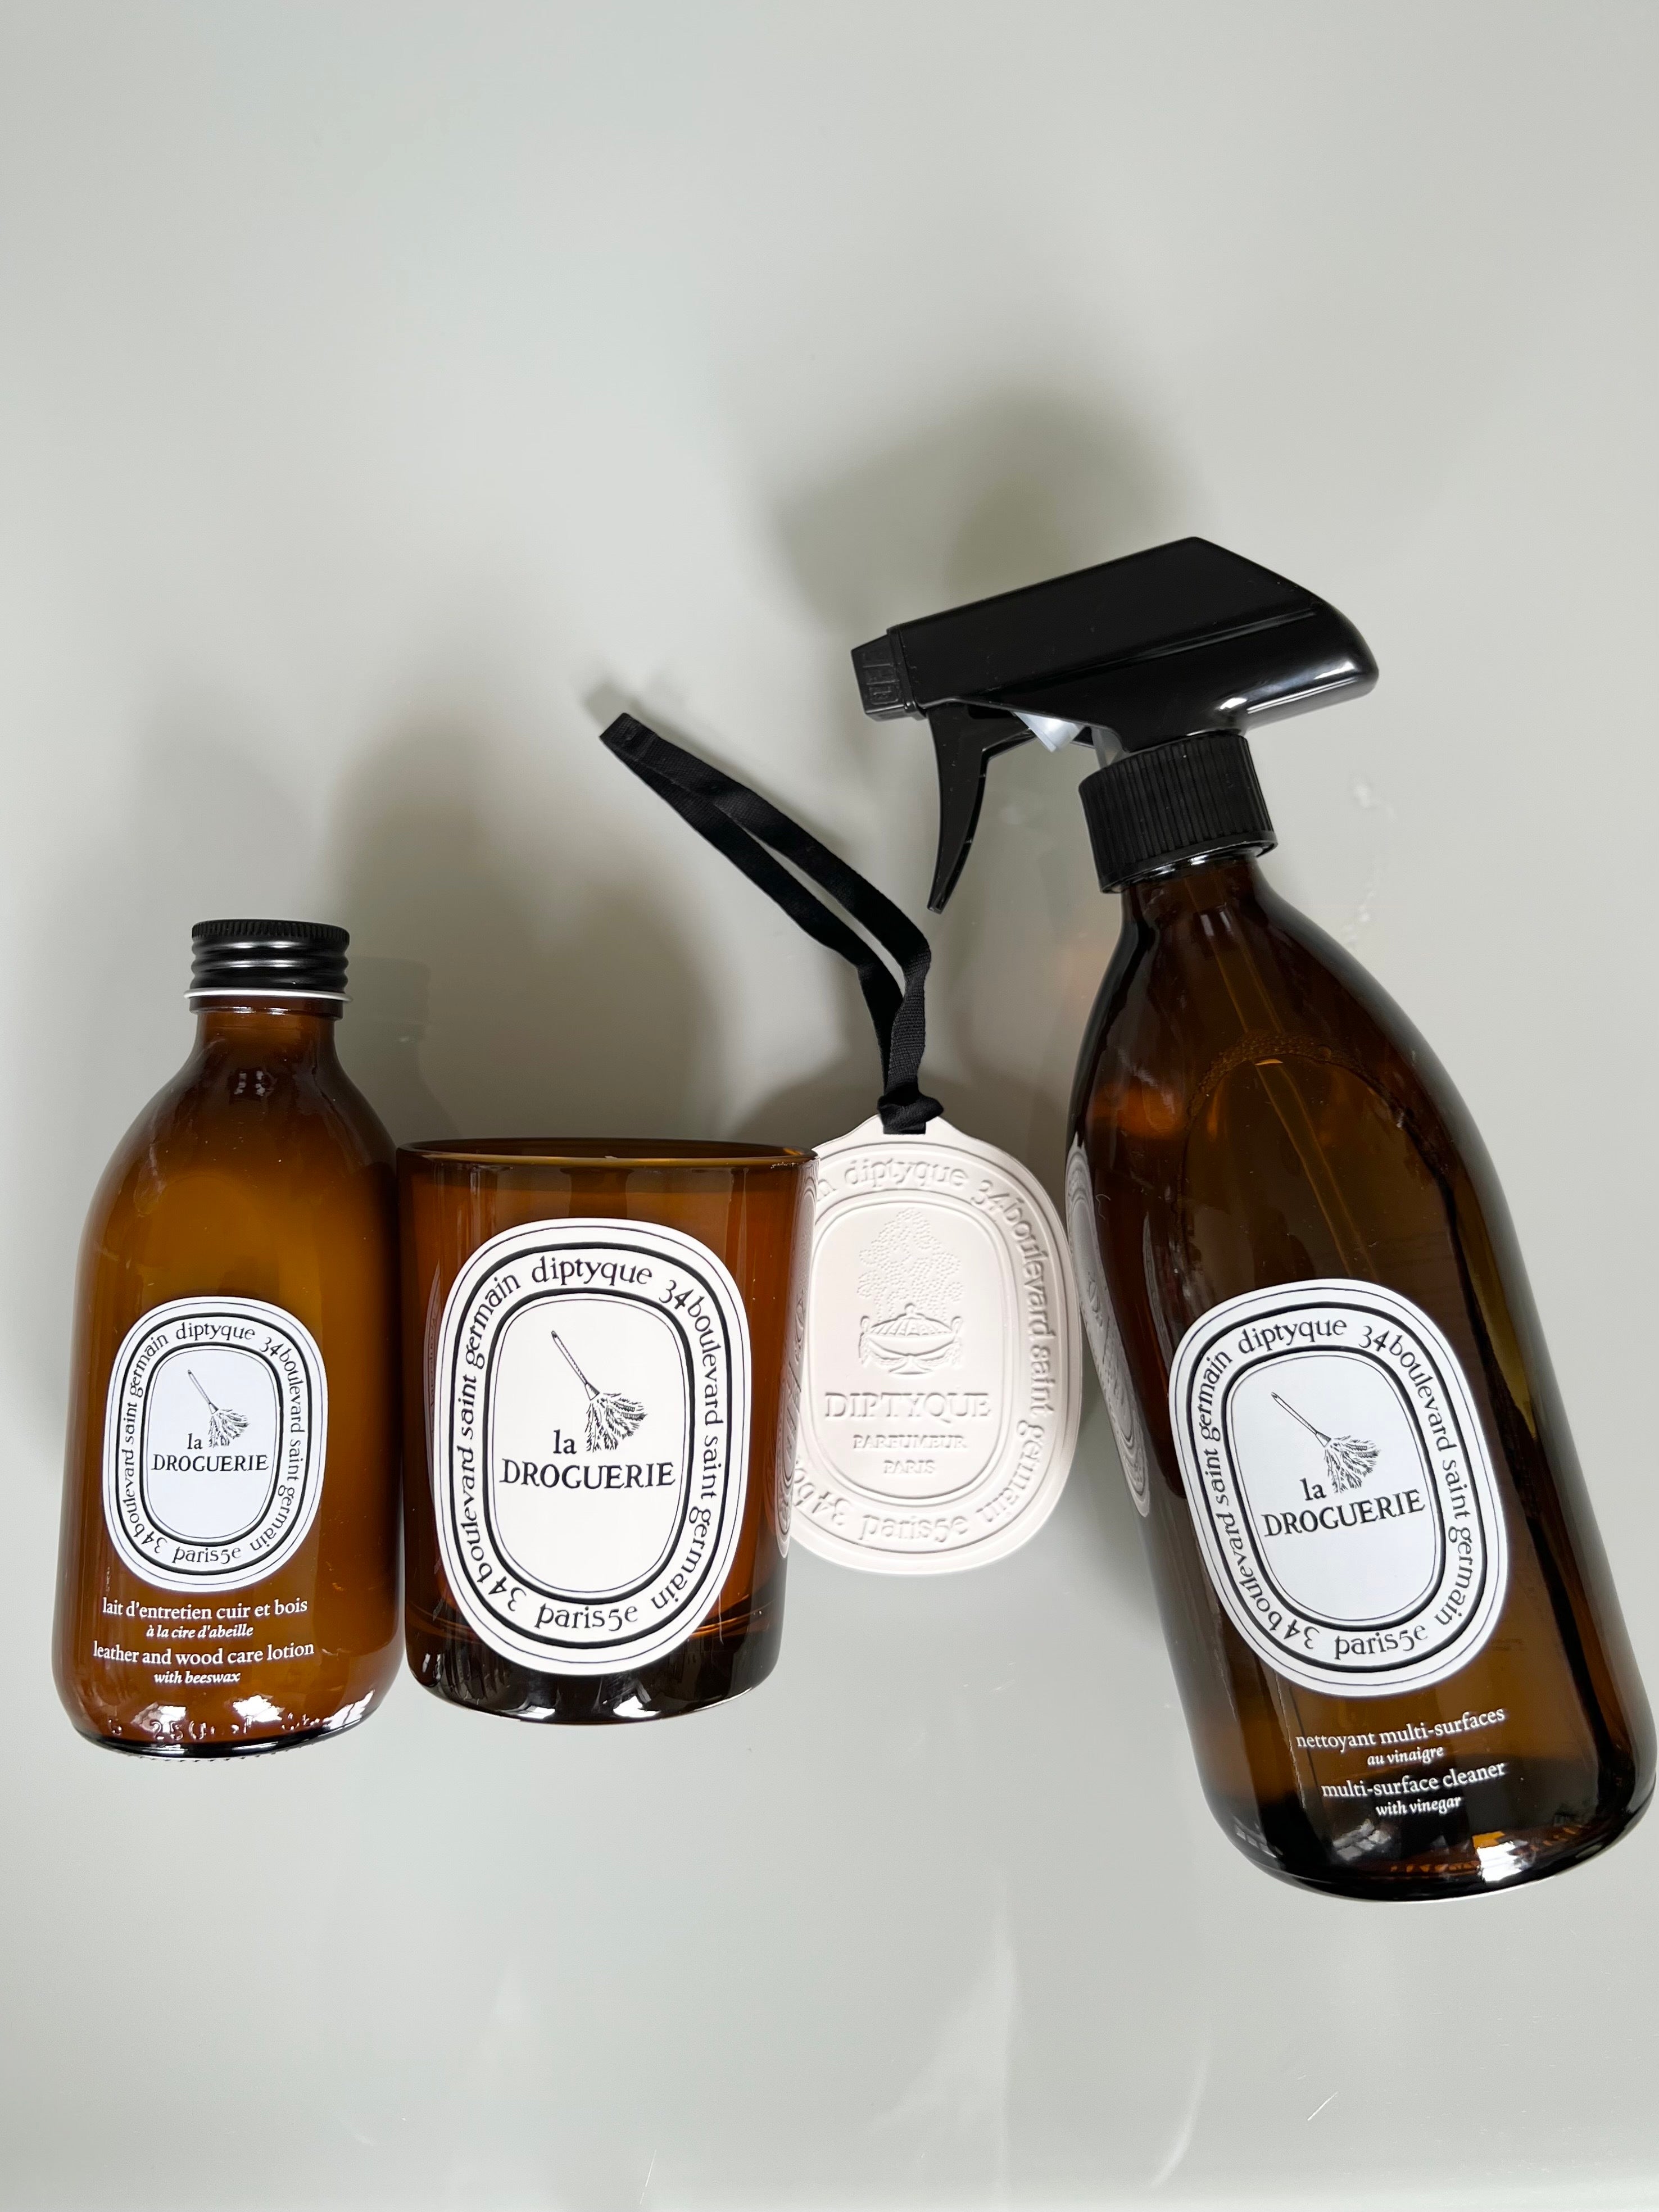 27 Squeaky-Clean Housekeeper Gifts For Your Totally Awesome Cleaning Lady